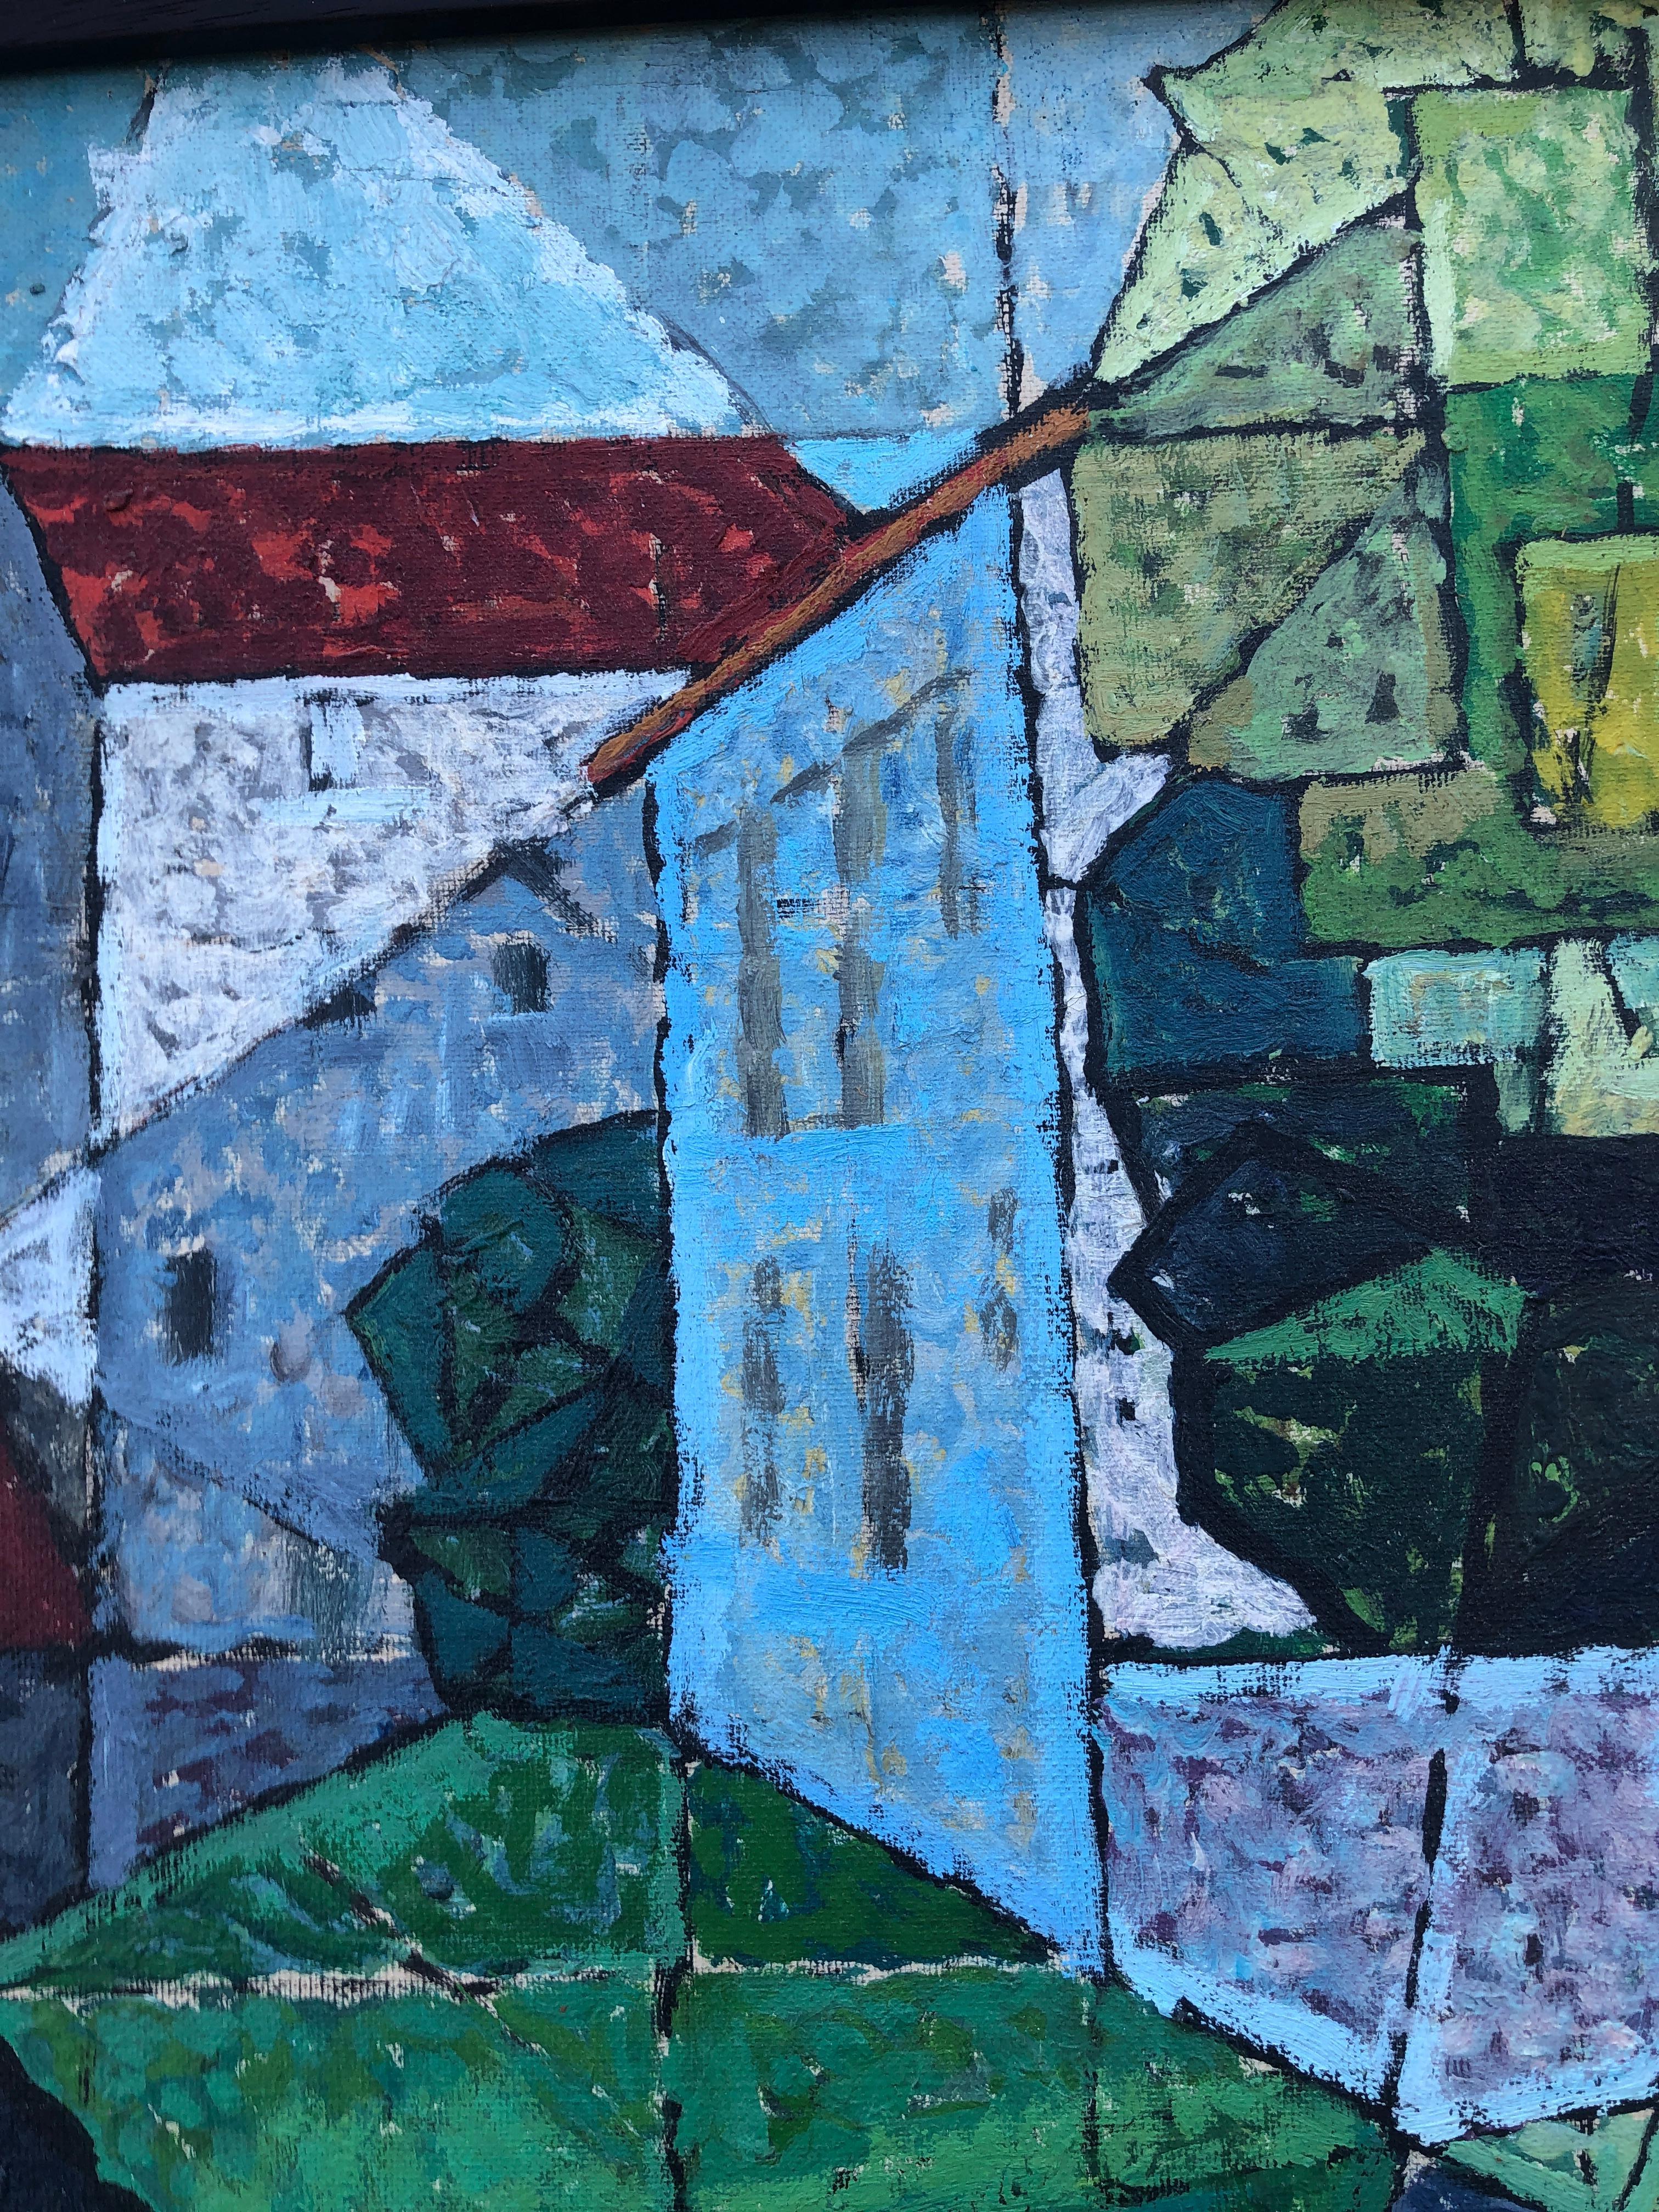 Spanish town cubist oil on canvas painting spain 2